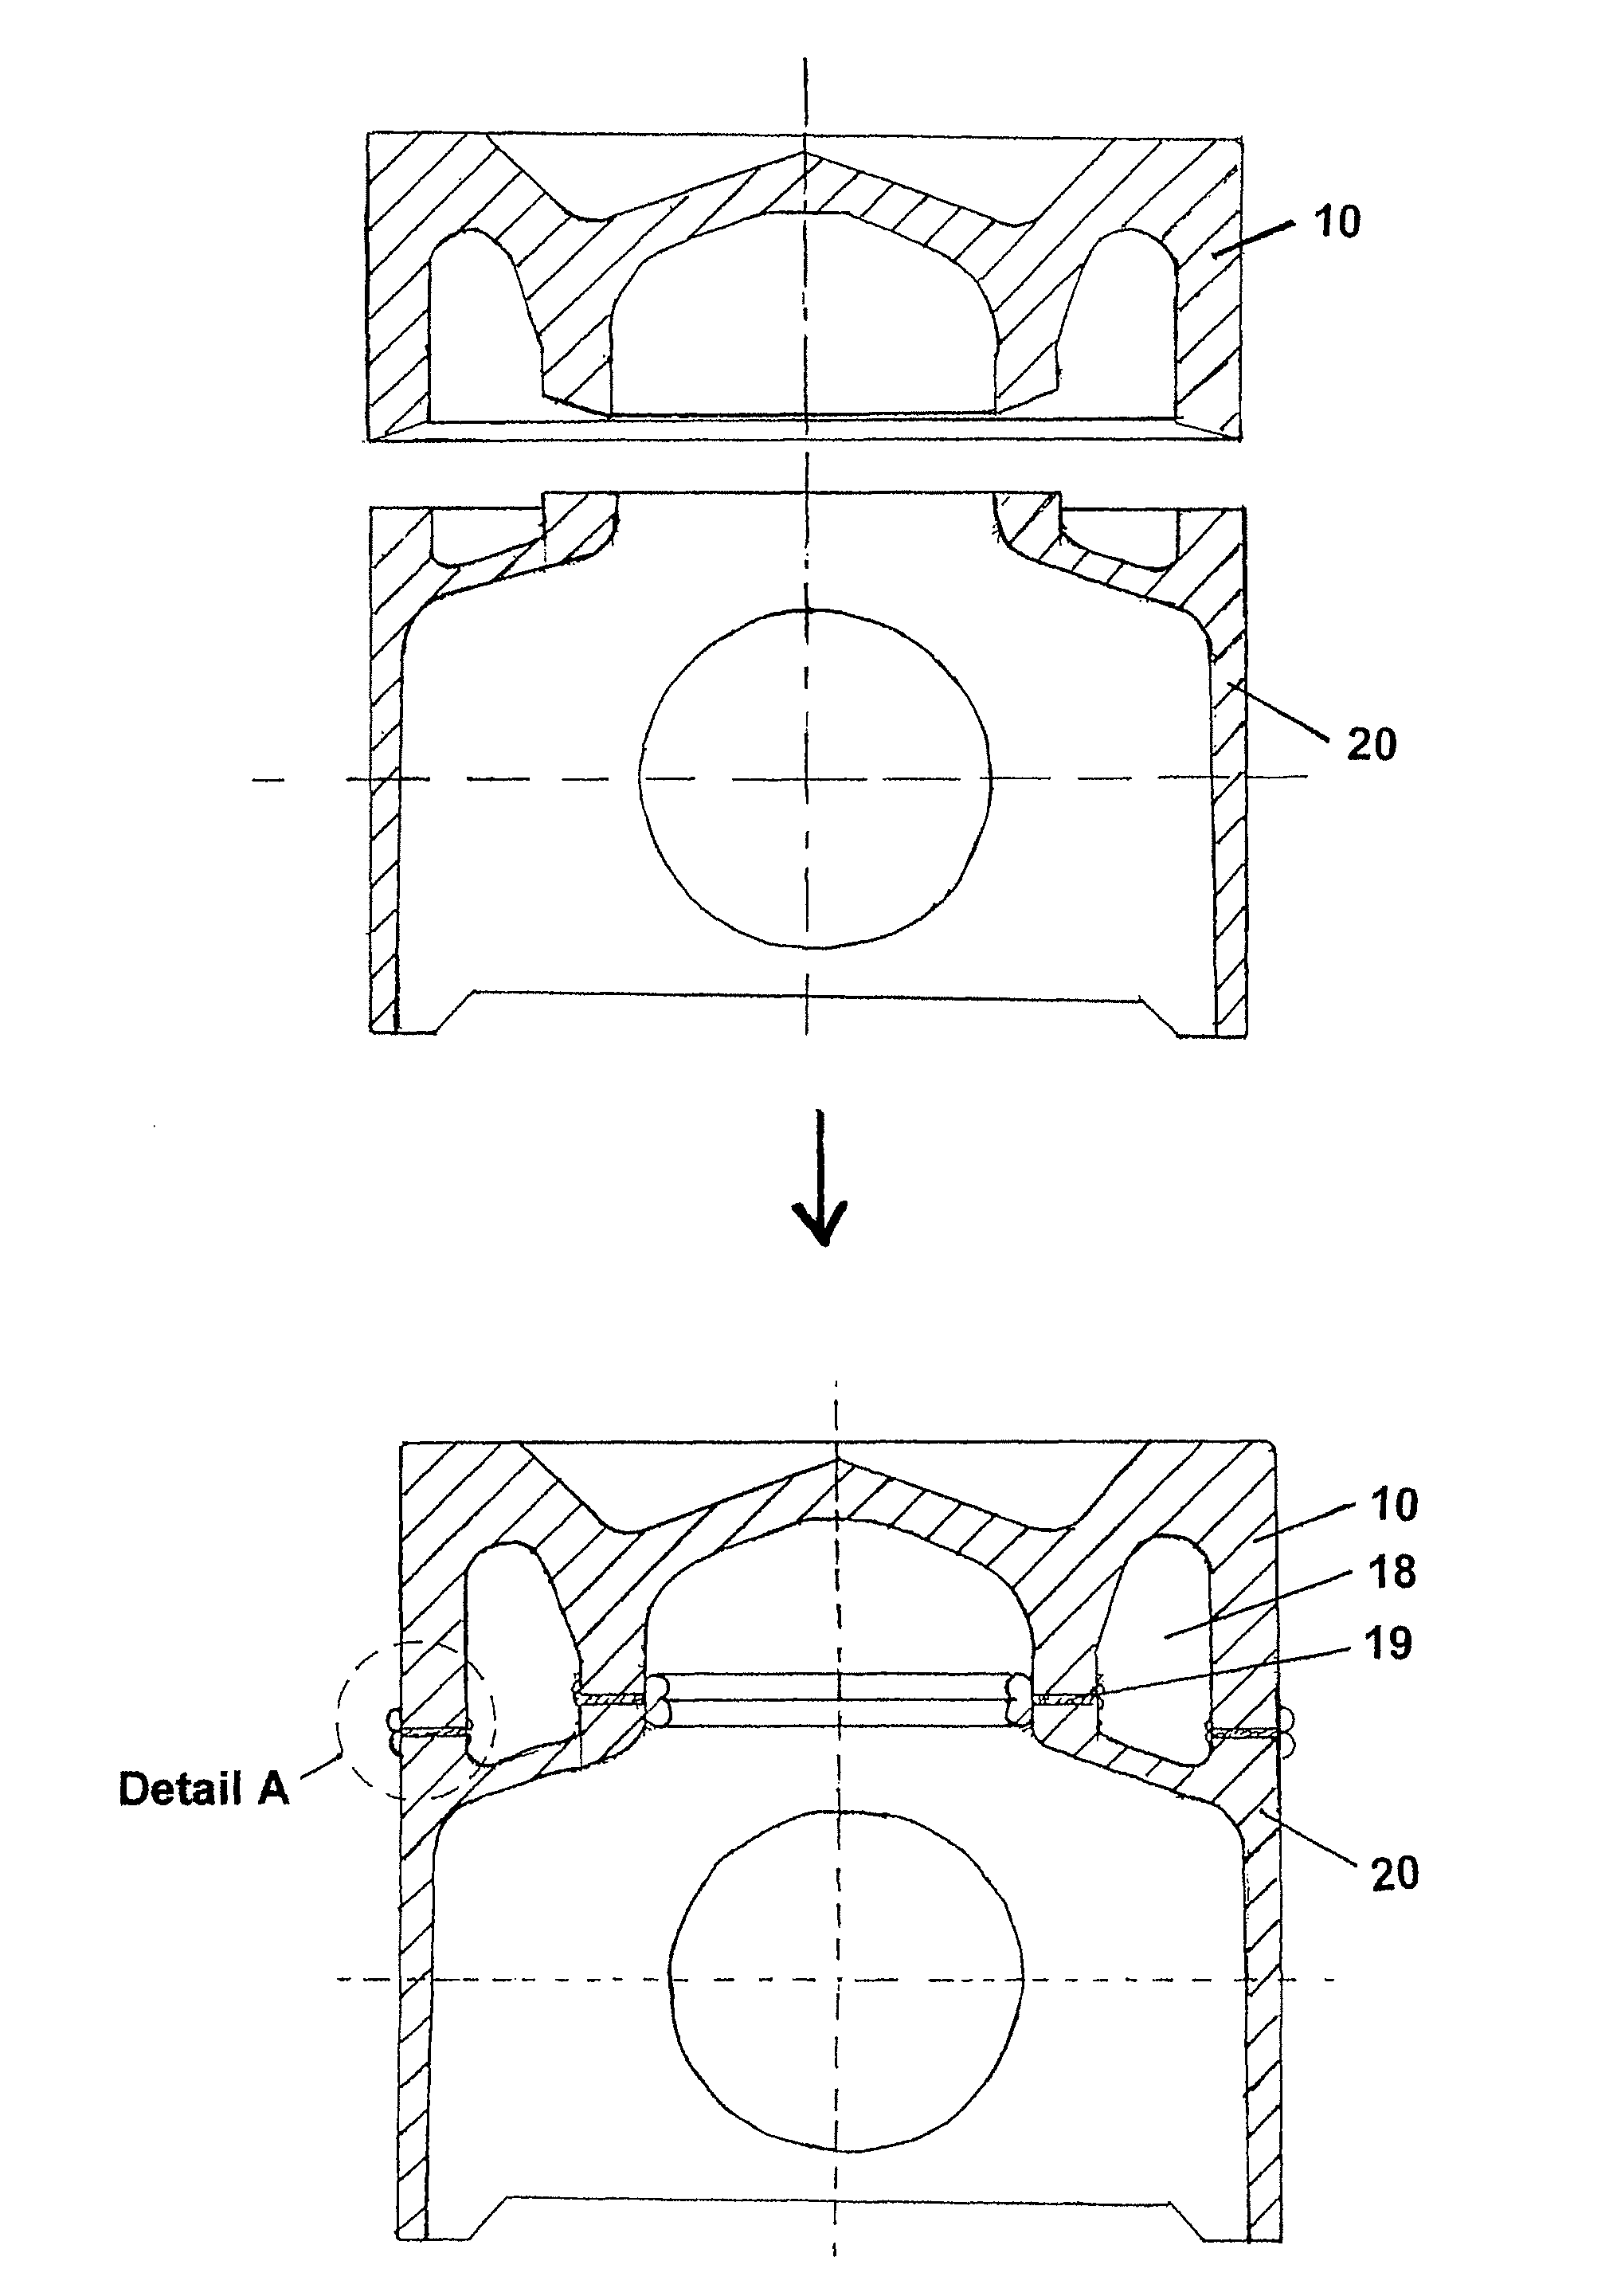 Method of friction welding of a piston having a cooling duct